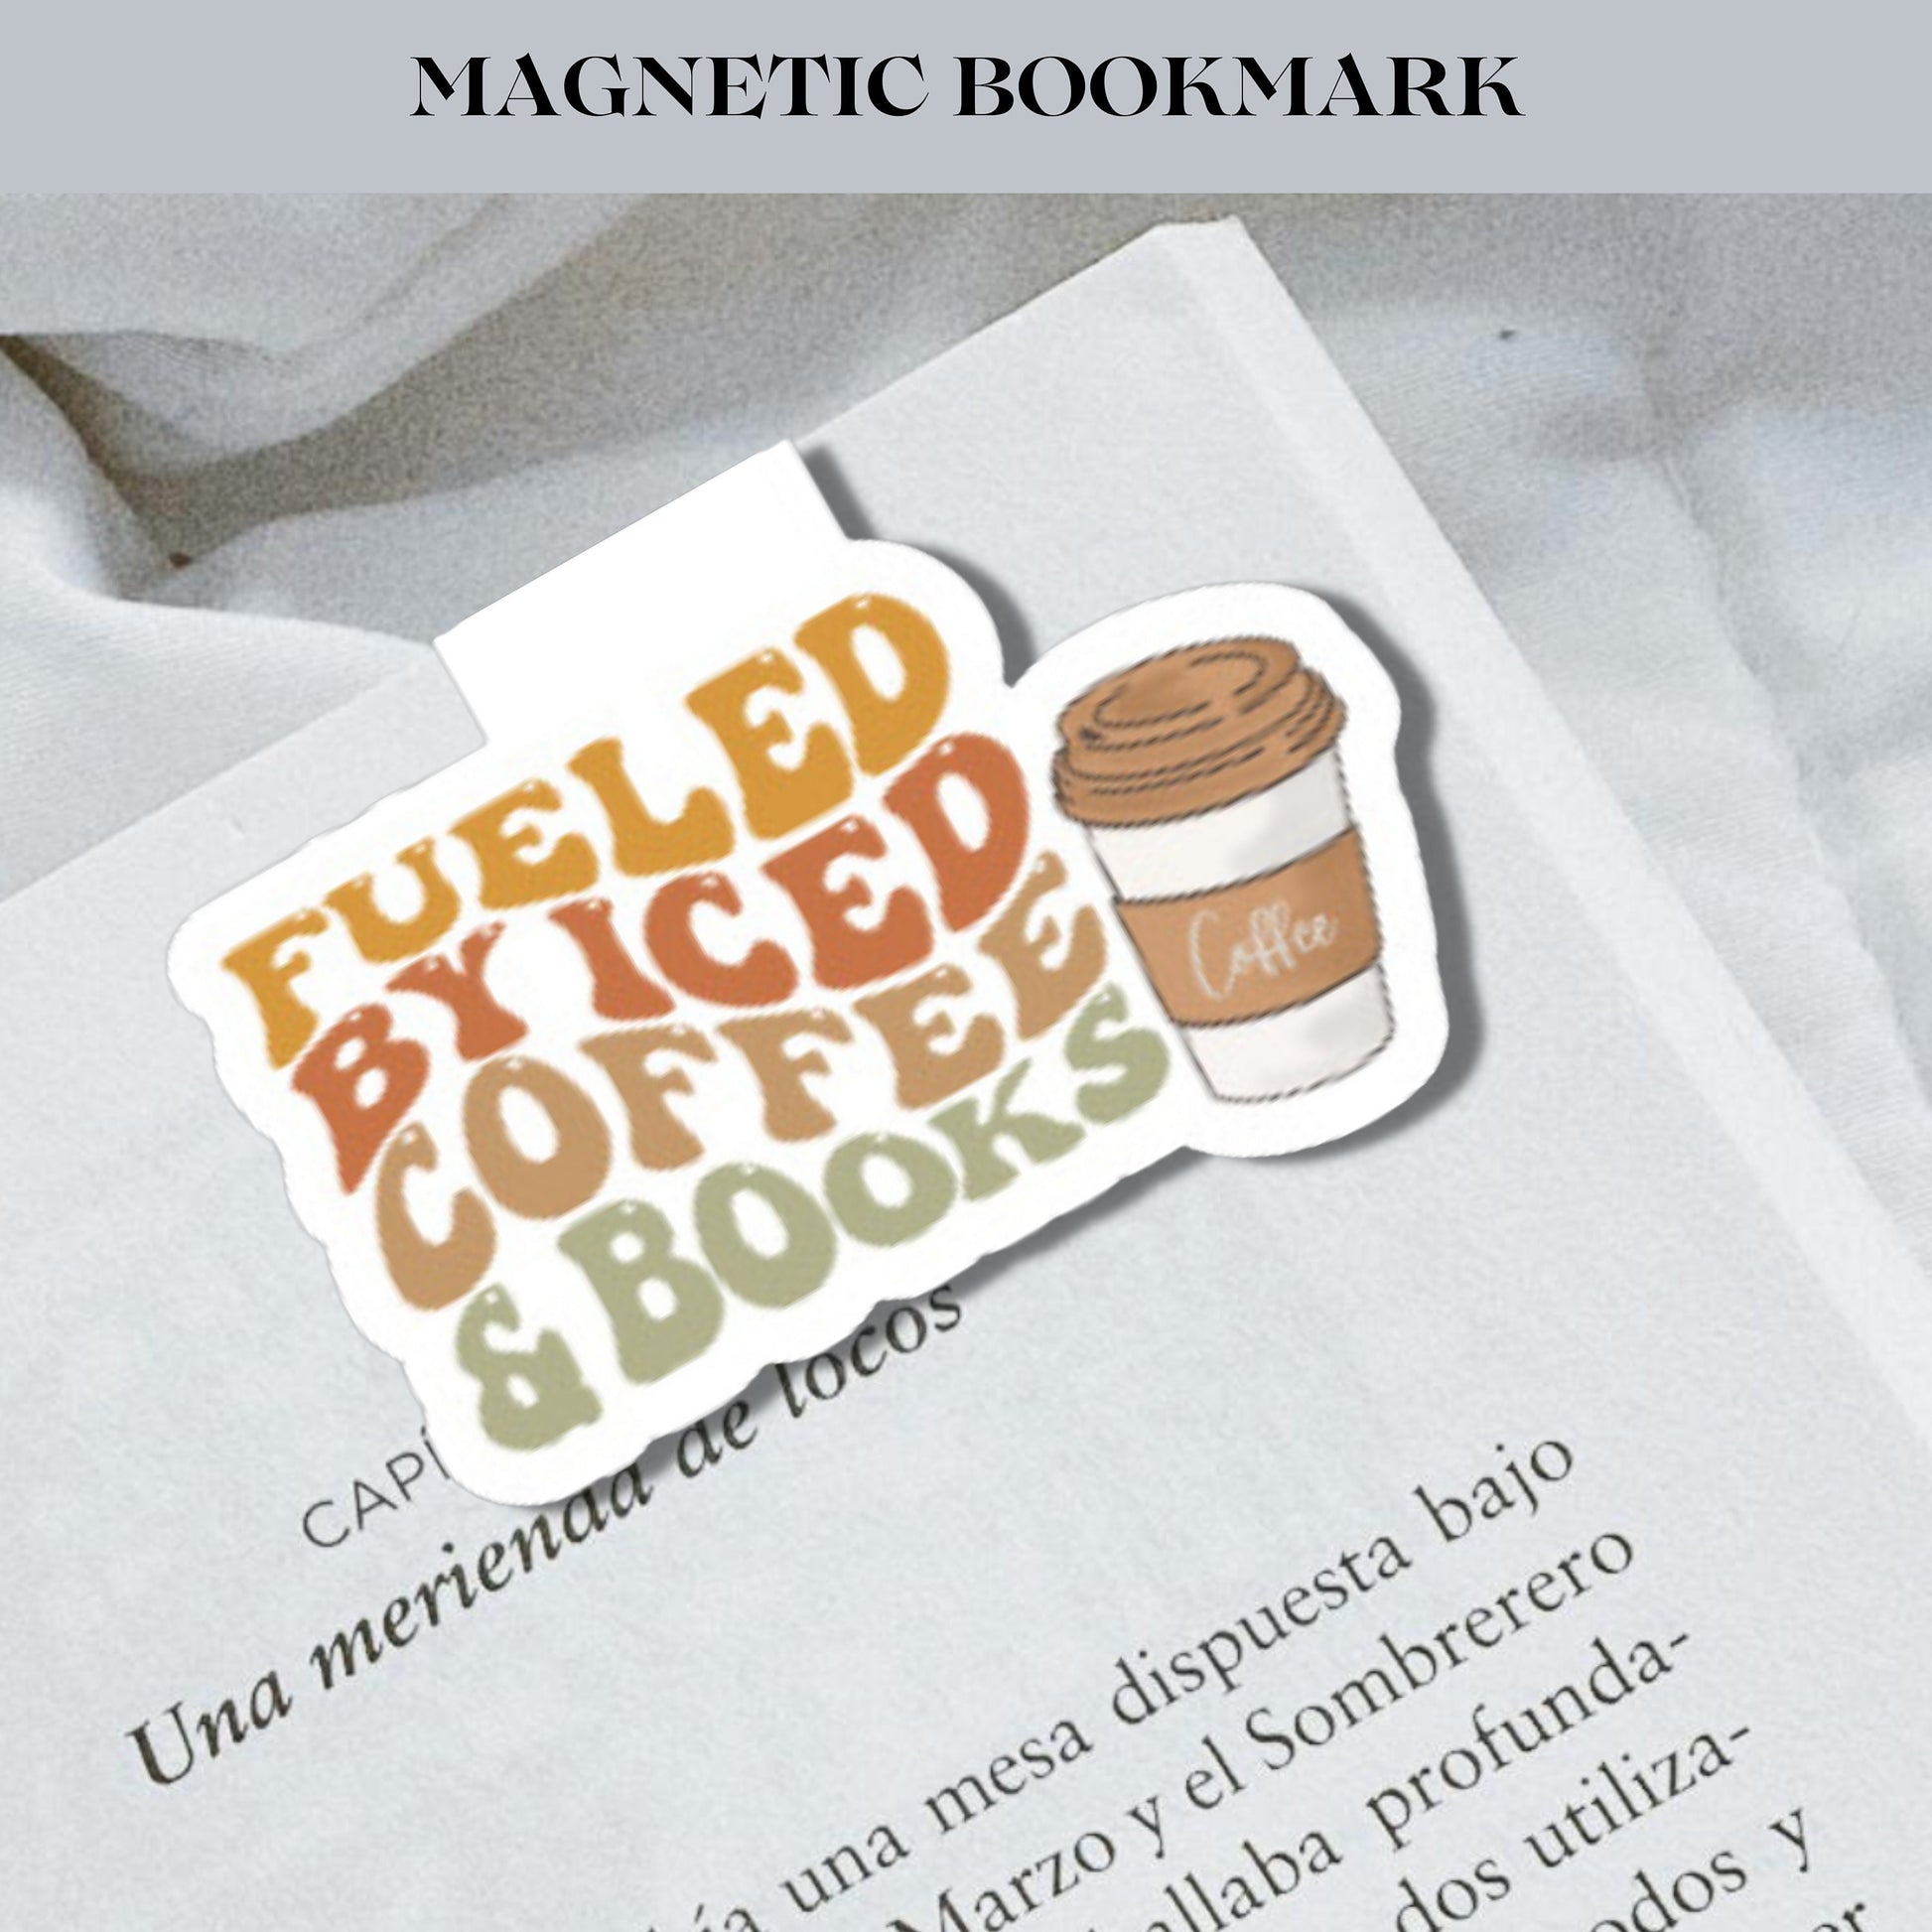 COFFEE MAGNETIC BOOKMARK | Bookmark | Book Accessories | Book Lover Gift | Cute Bookmark | Reading Gifts | Iced Coffee |Cute bookmark | Gift